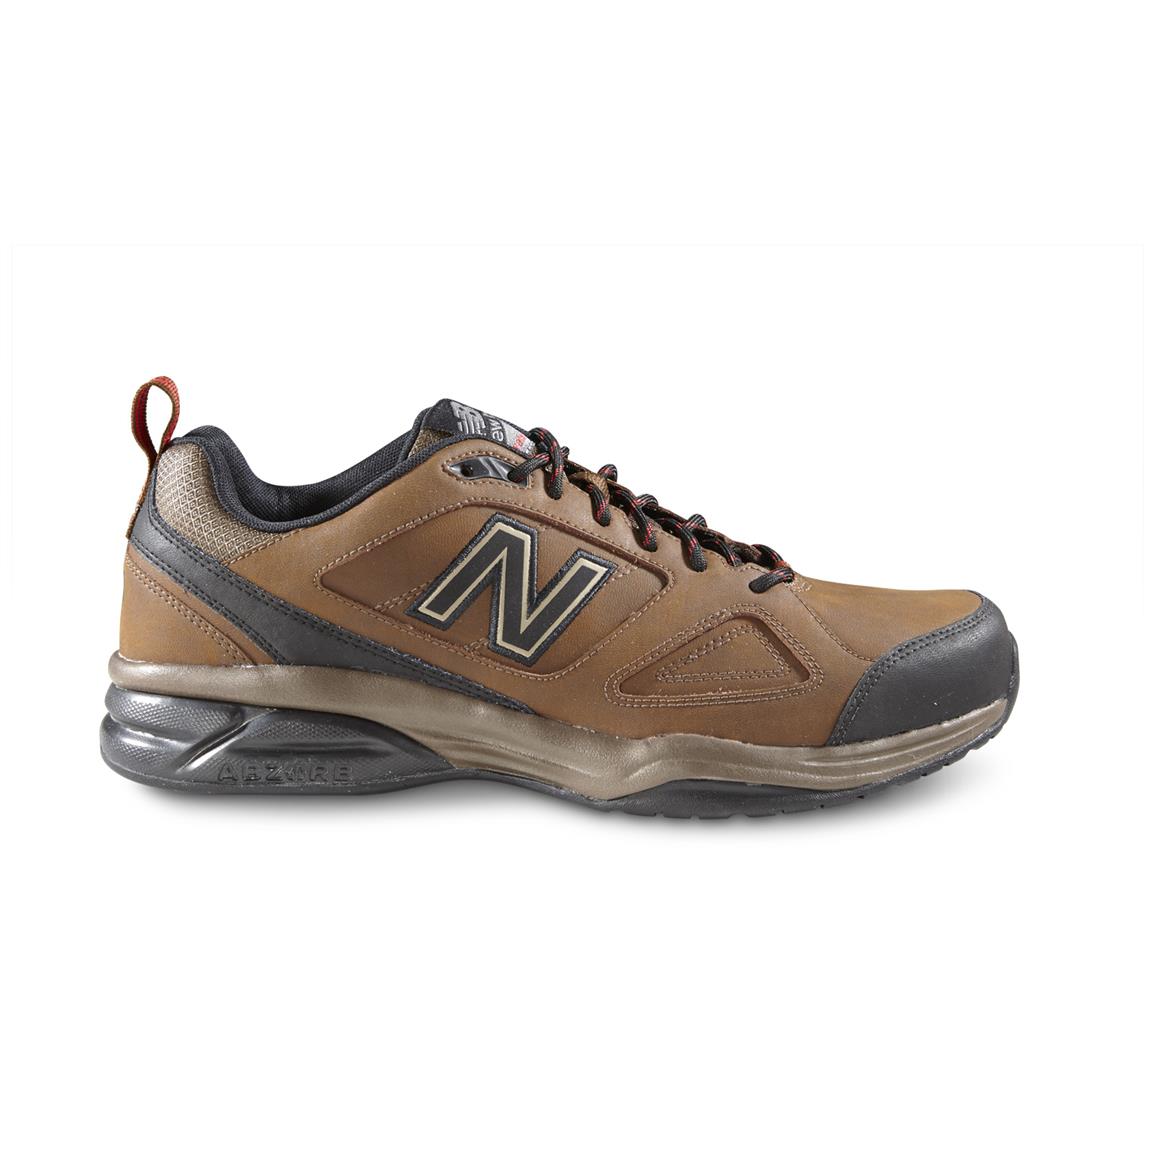 New Balance Men's 623 v3 Leather Water Resistant Cross Trainers ...